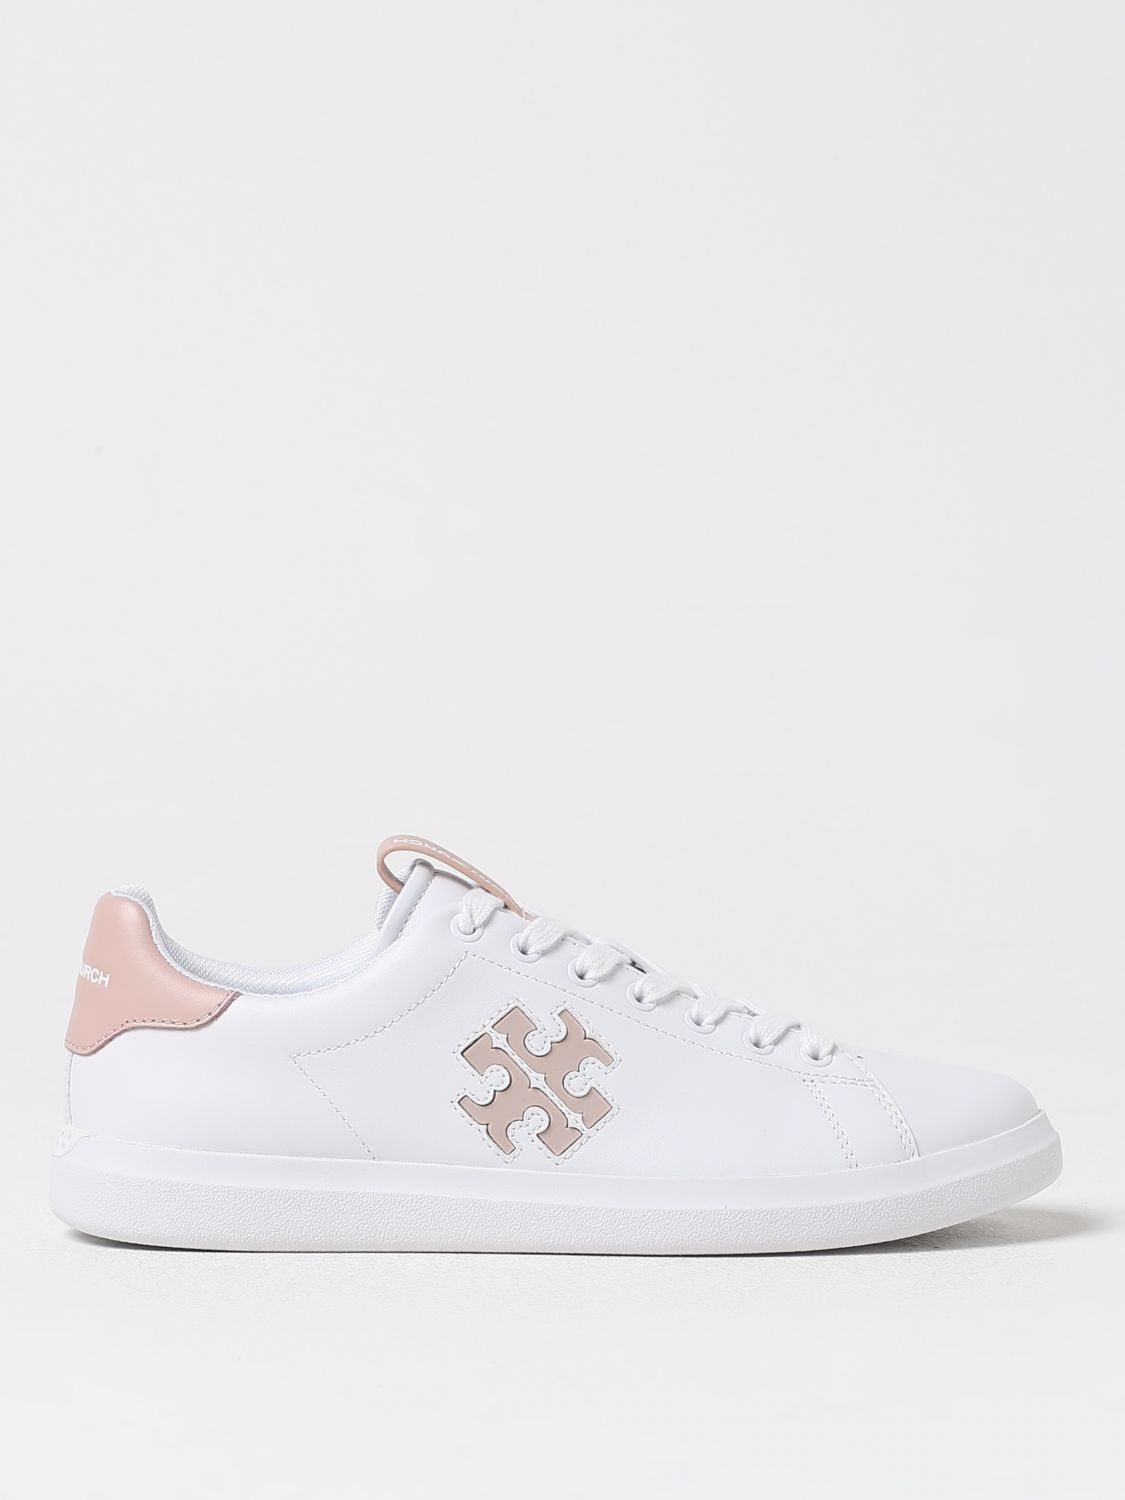 Tory Burch Sneakers TORY BURCH Woman color White 1